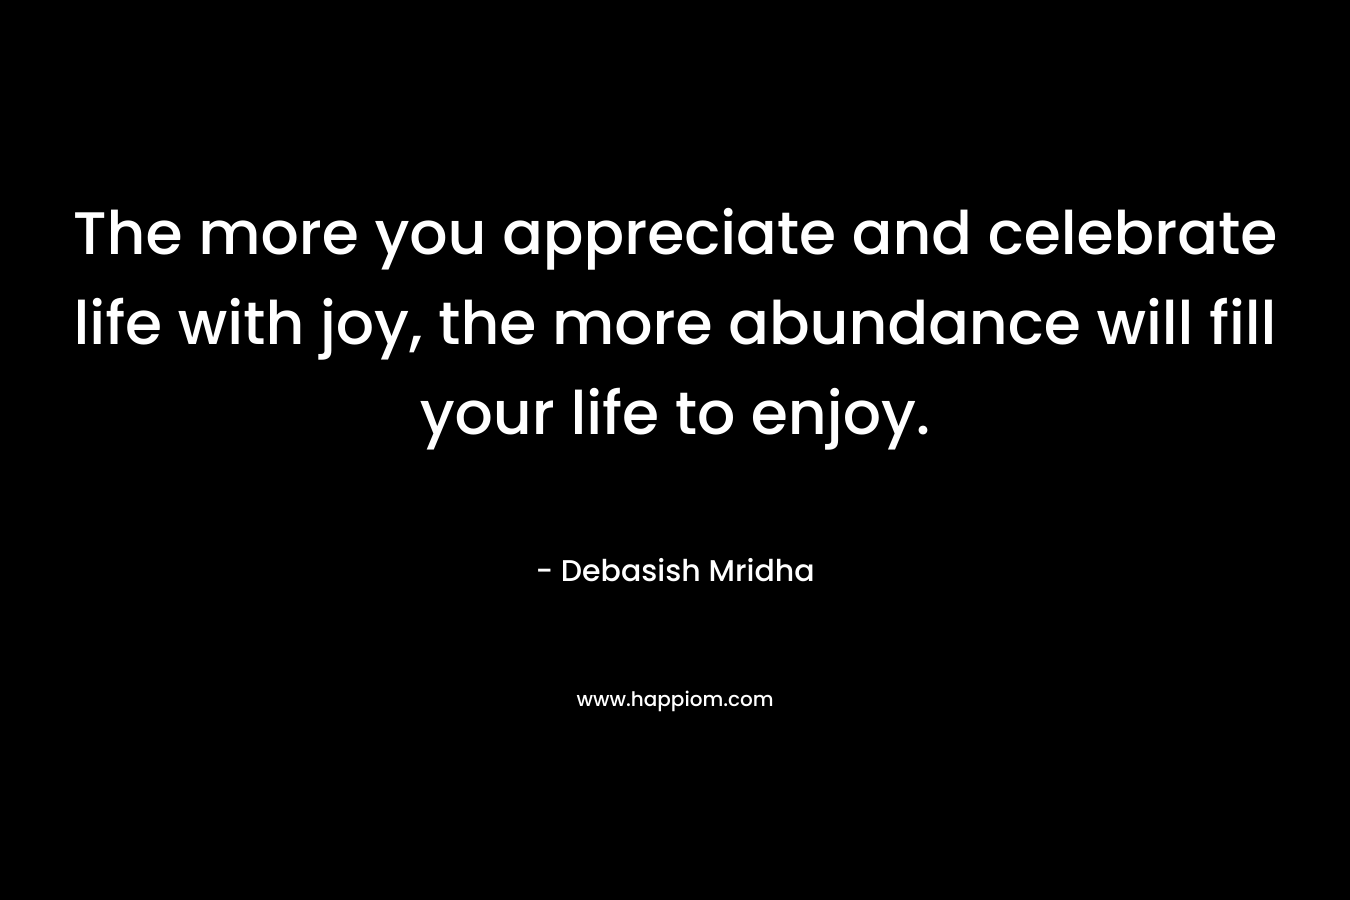 The more you appreciate and celebrate life with joy, the more abundance will fill your life to enjoy.